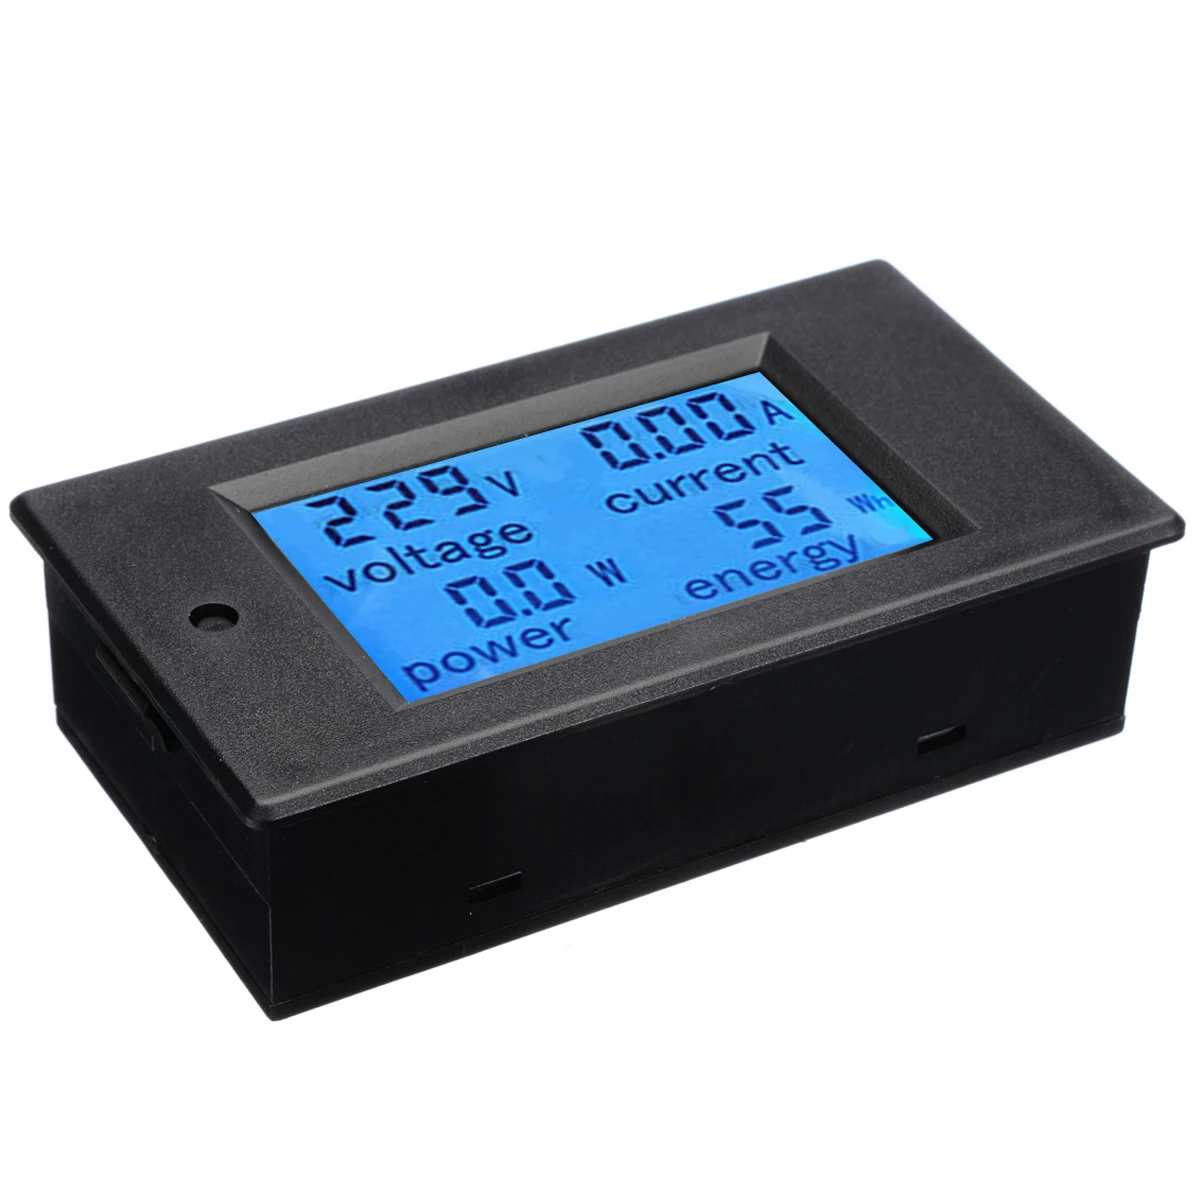 AC 100A Digital LCD Meter Wattmeter Power Voltmeter Amperemeter With Current Transformer For Electrical Instruments